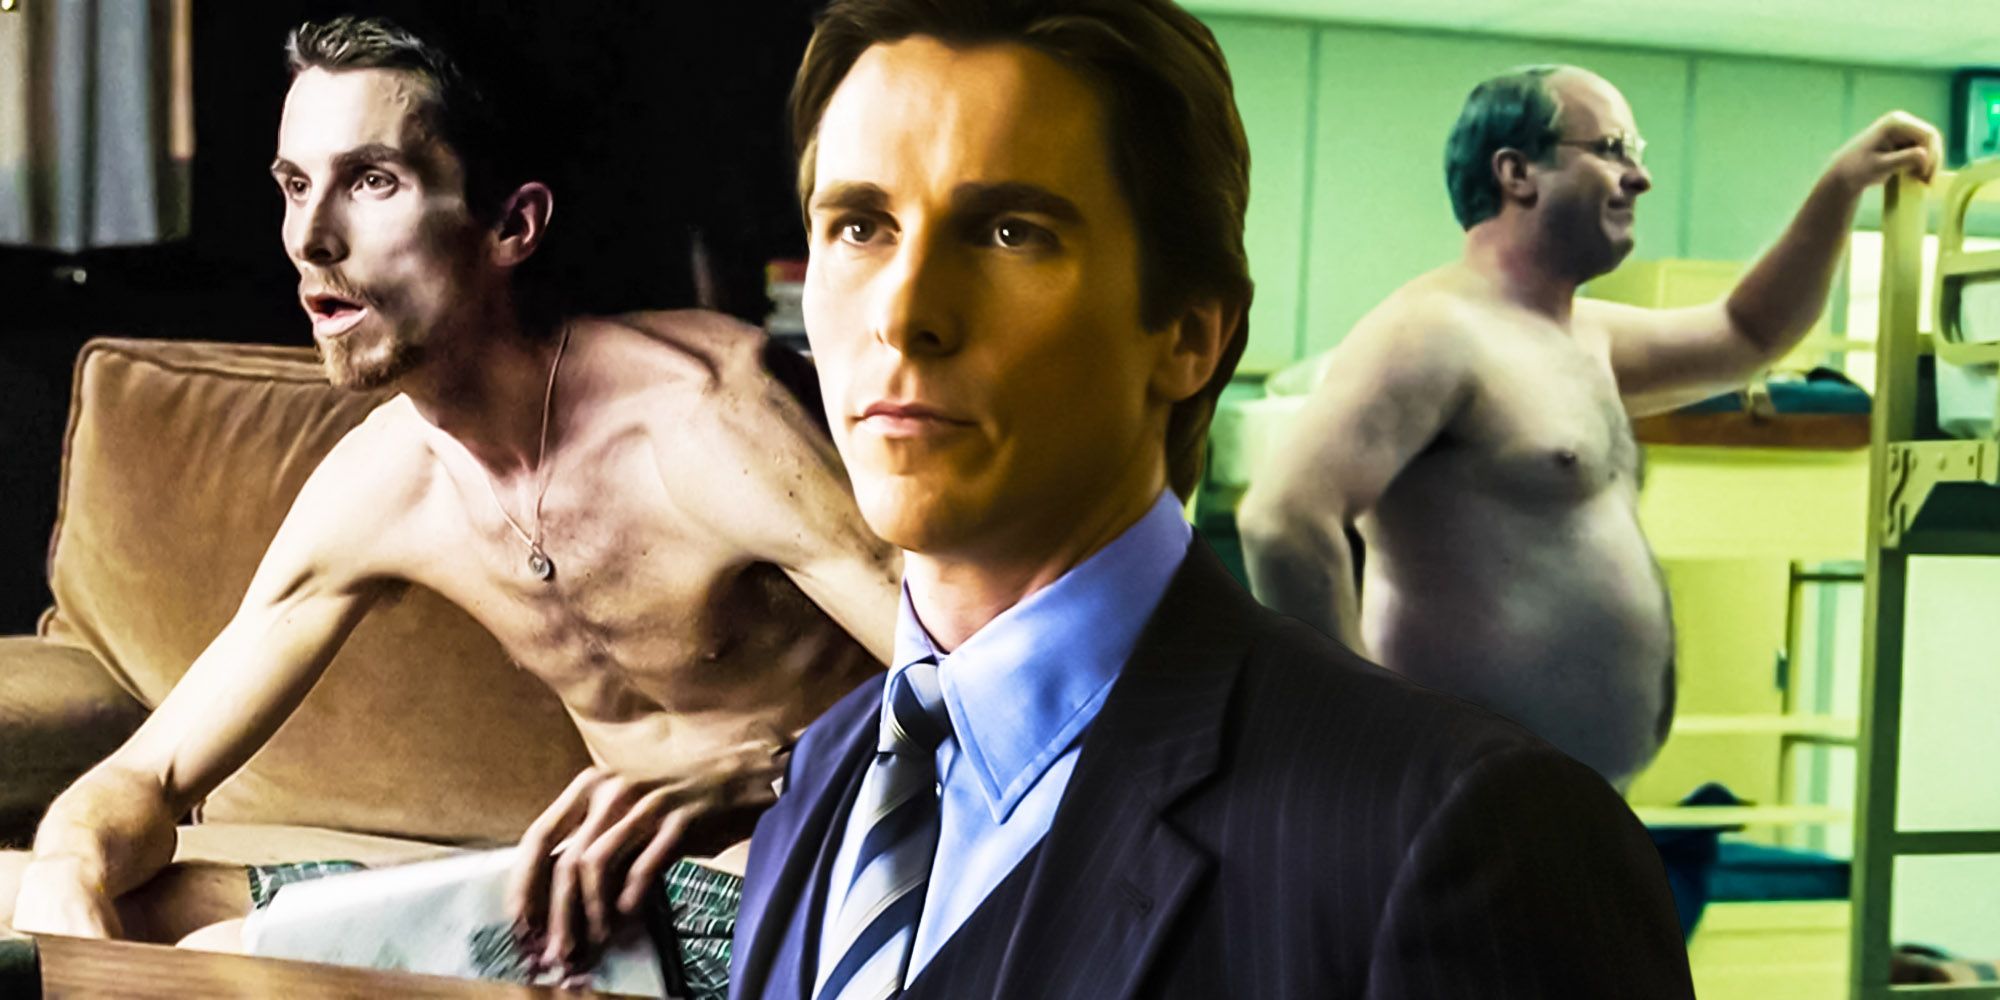 Christian Bale at different weights in American Psycho, The Machinist, and Vice